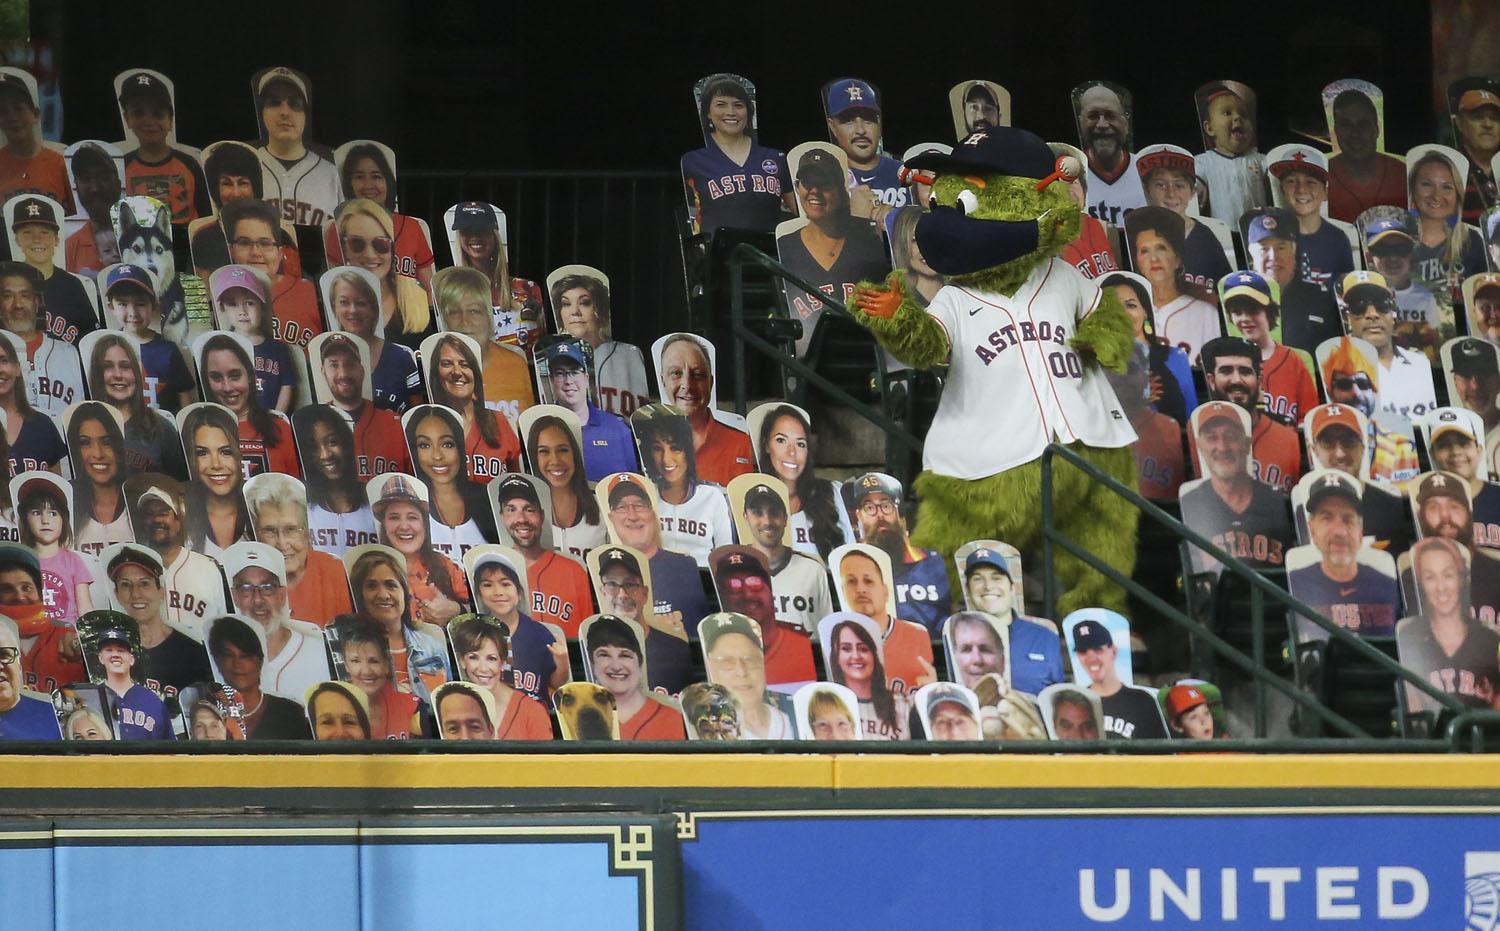 MLB mascots face uncertainty during pandemic